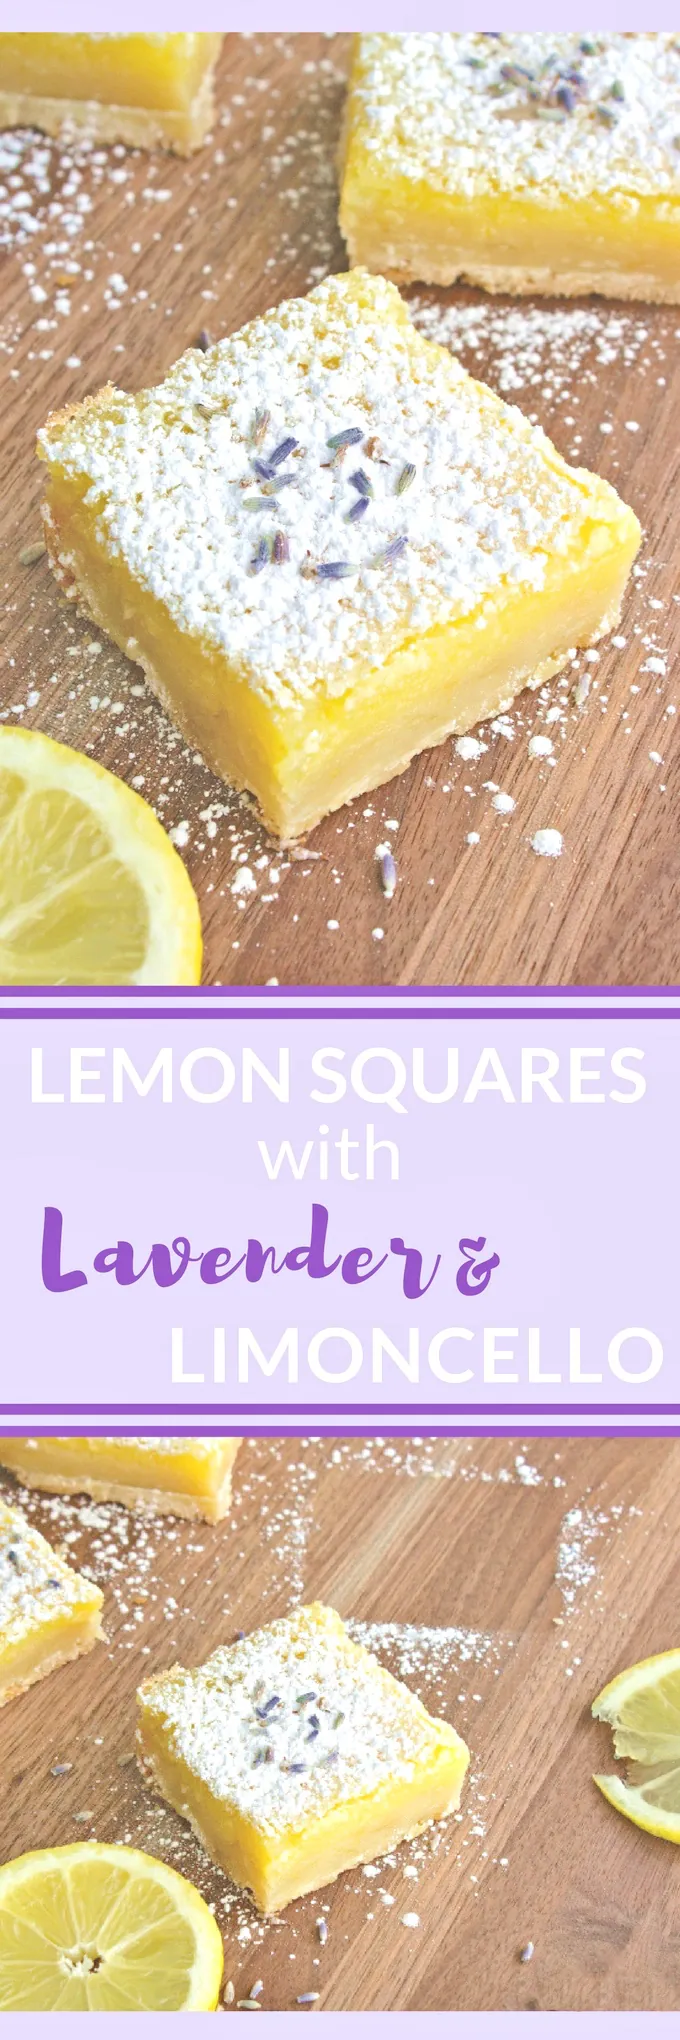 Lemon Squares with Lavender & Limoncello are bright and tasty treats. You'll love thees Lemon Squares with Lavender & Limoncello for a special dessert.